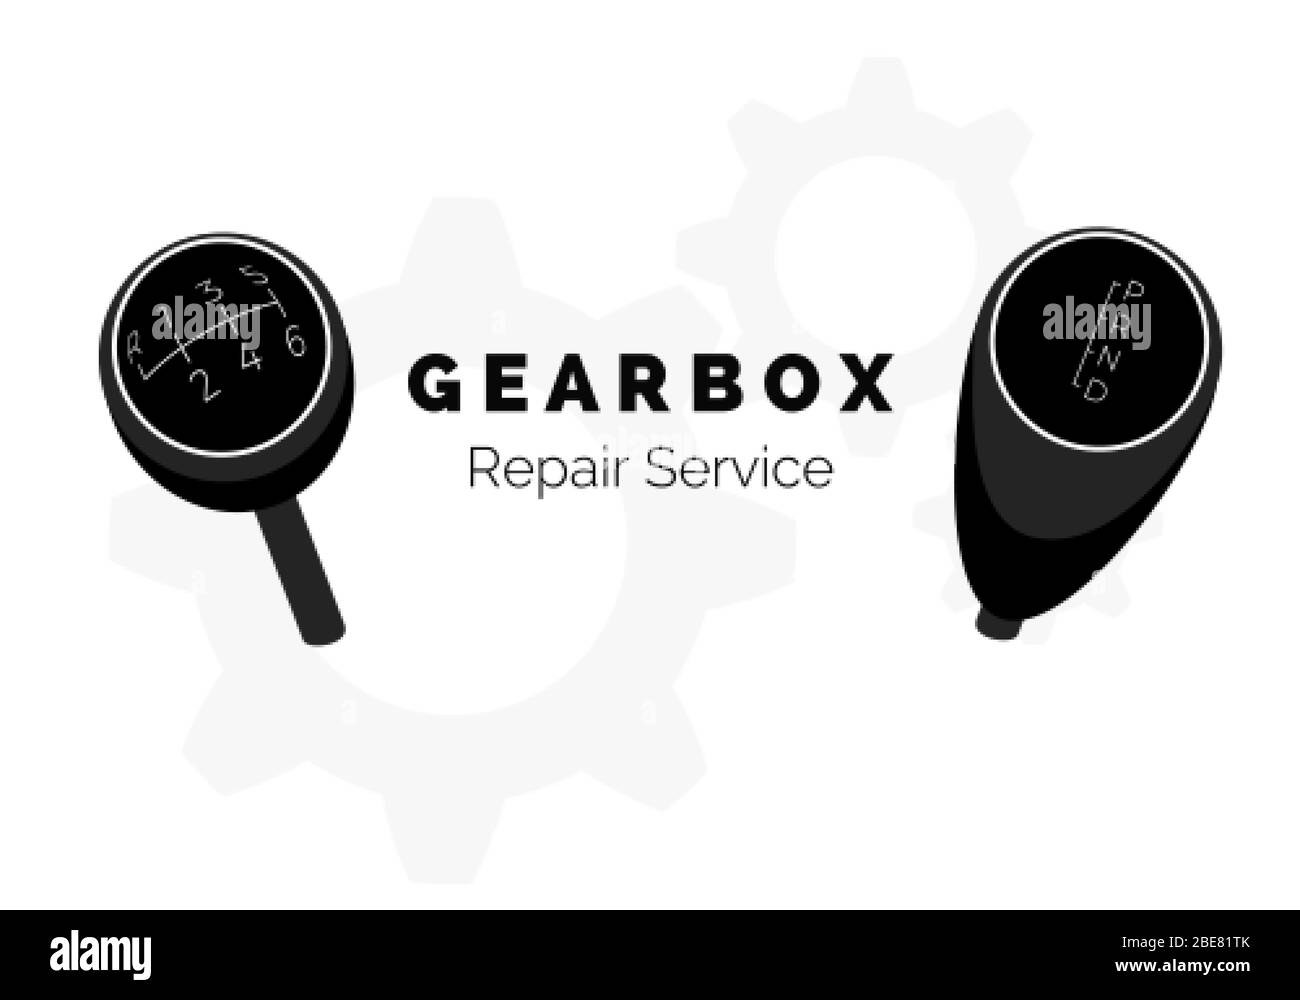 Gearbox repair service advertising. Vehicle Gear Knob. Manual and automatic car transmission. Vector illustraion Stock Vector